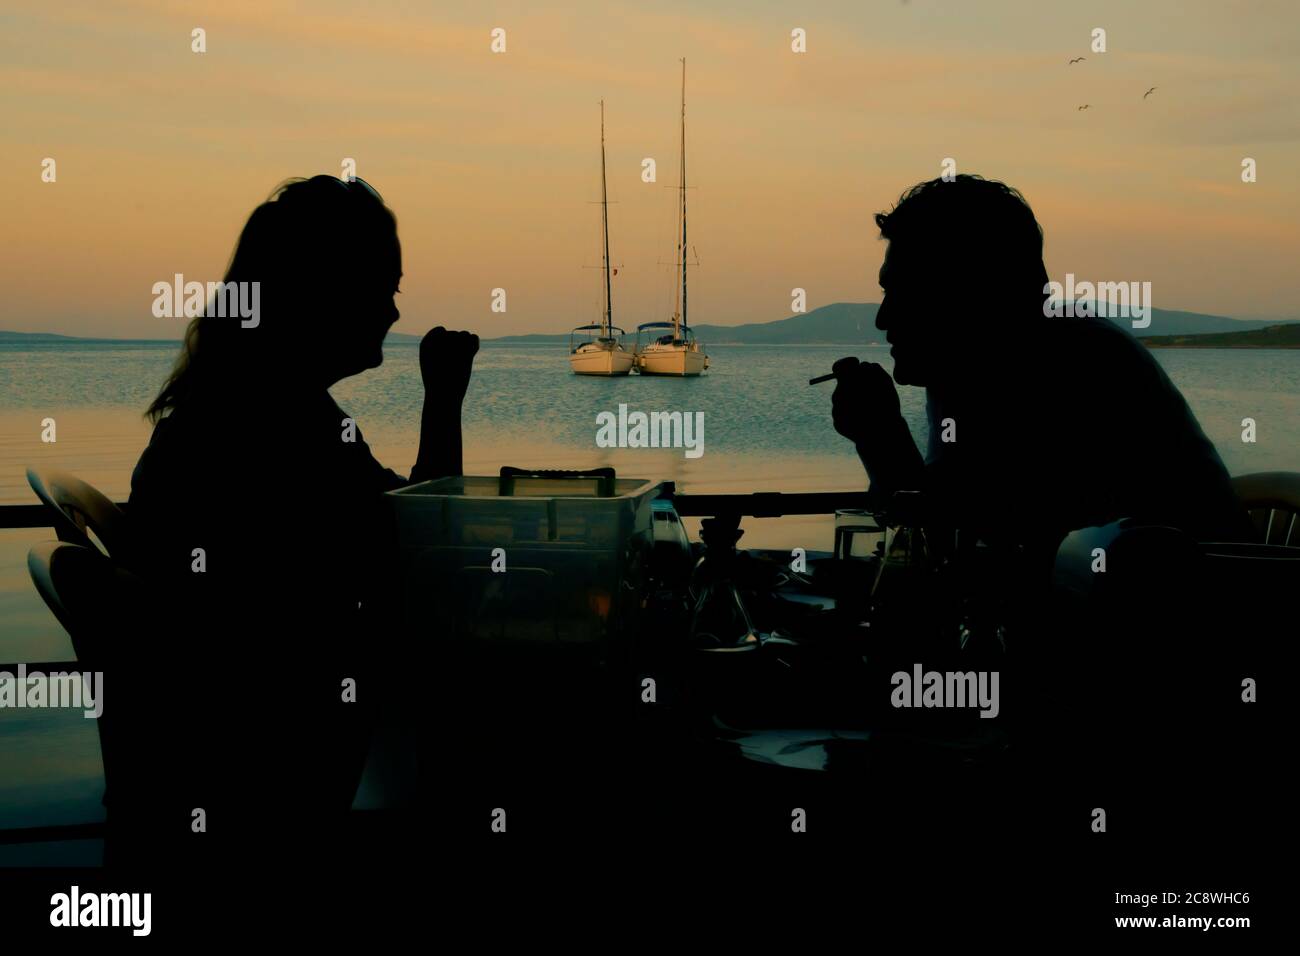 A couple having dinner in sunset time at sea side with sailboats and sea view. Stock Photo